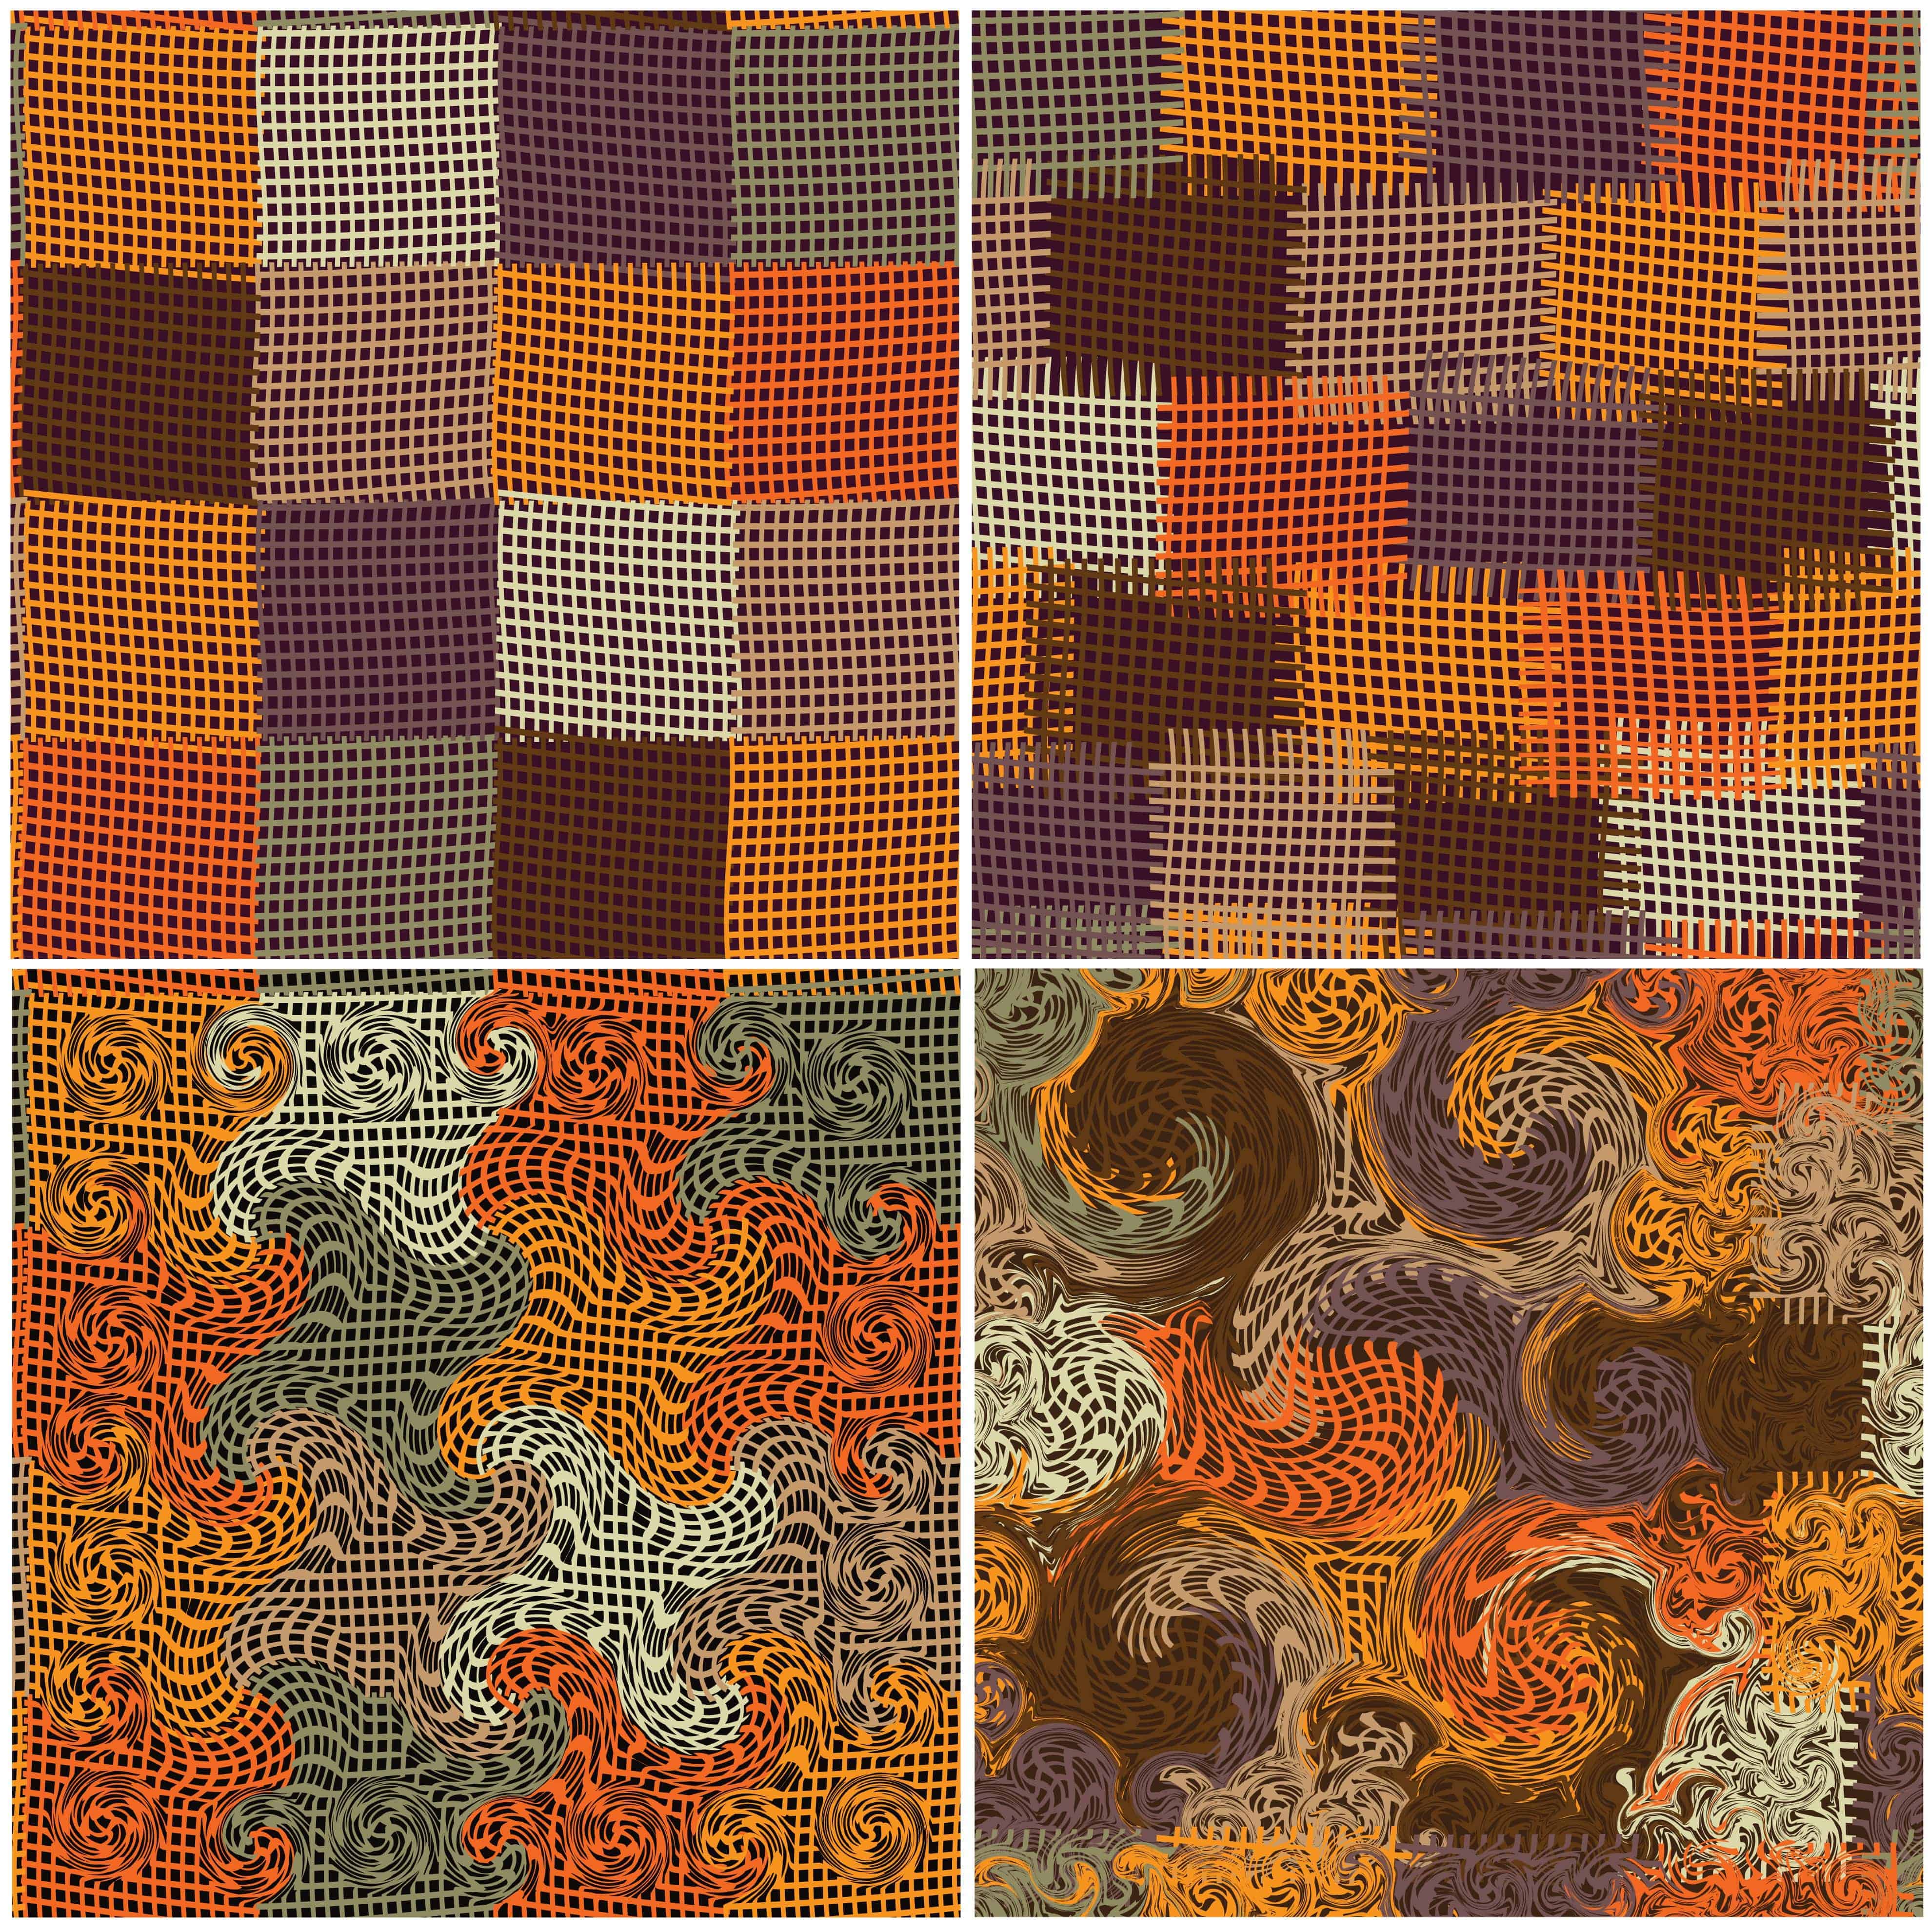 A look at the patterns of a four patch quilt.